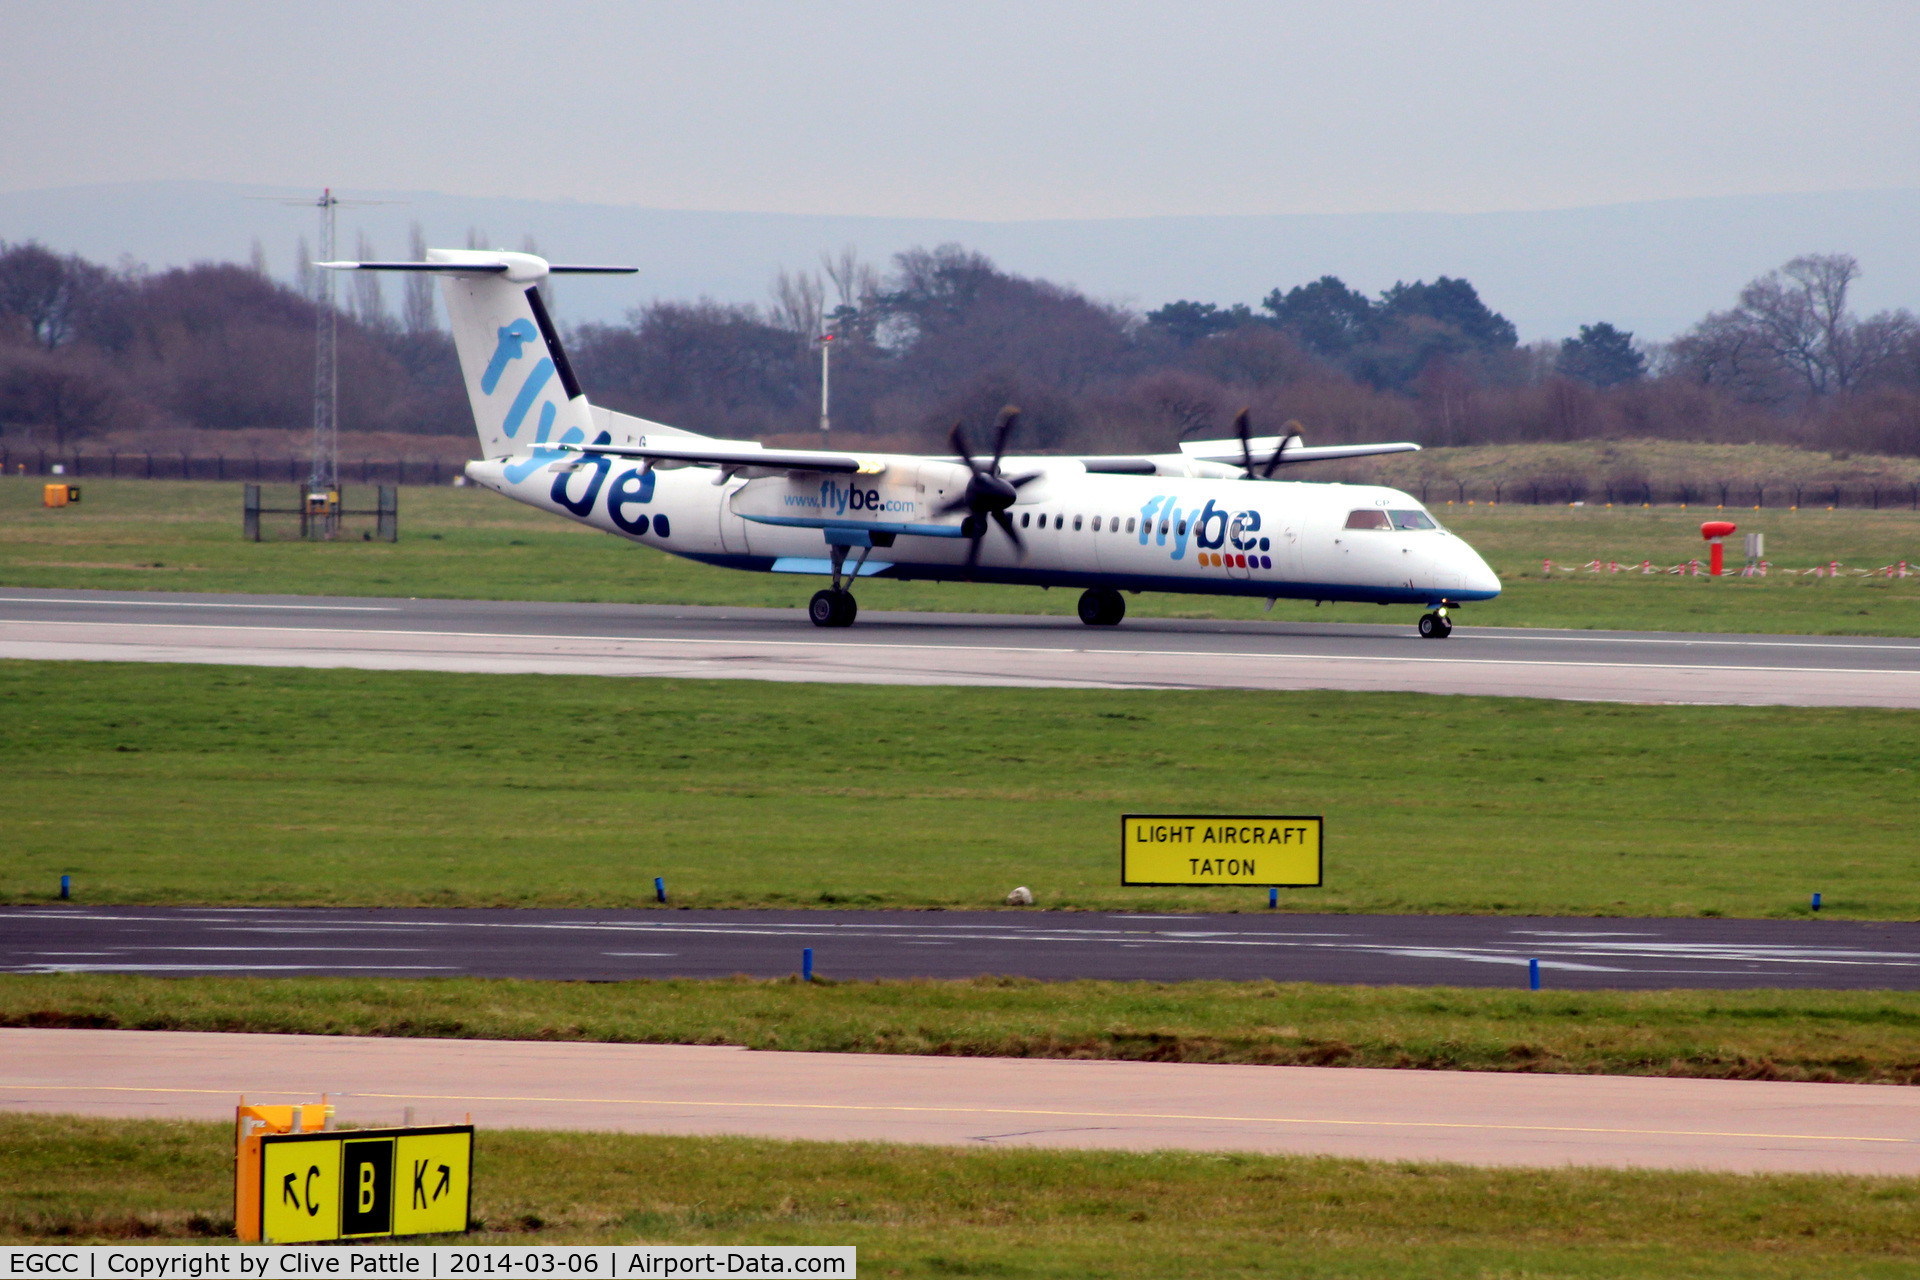 Manchester Airport, Manchester, England United Kingdom (EGCC) - Flybe action at Manchester EGCC